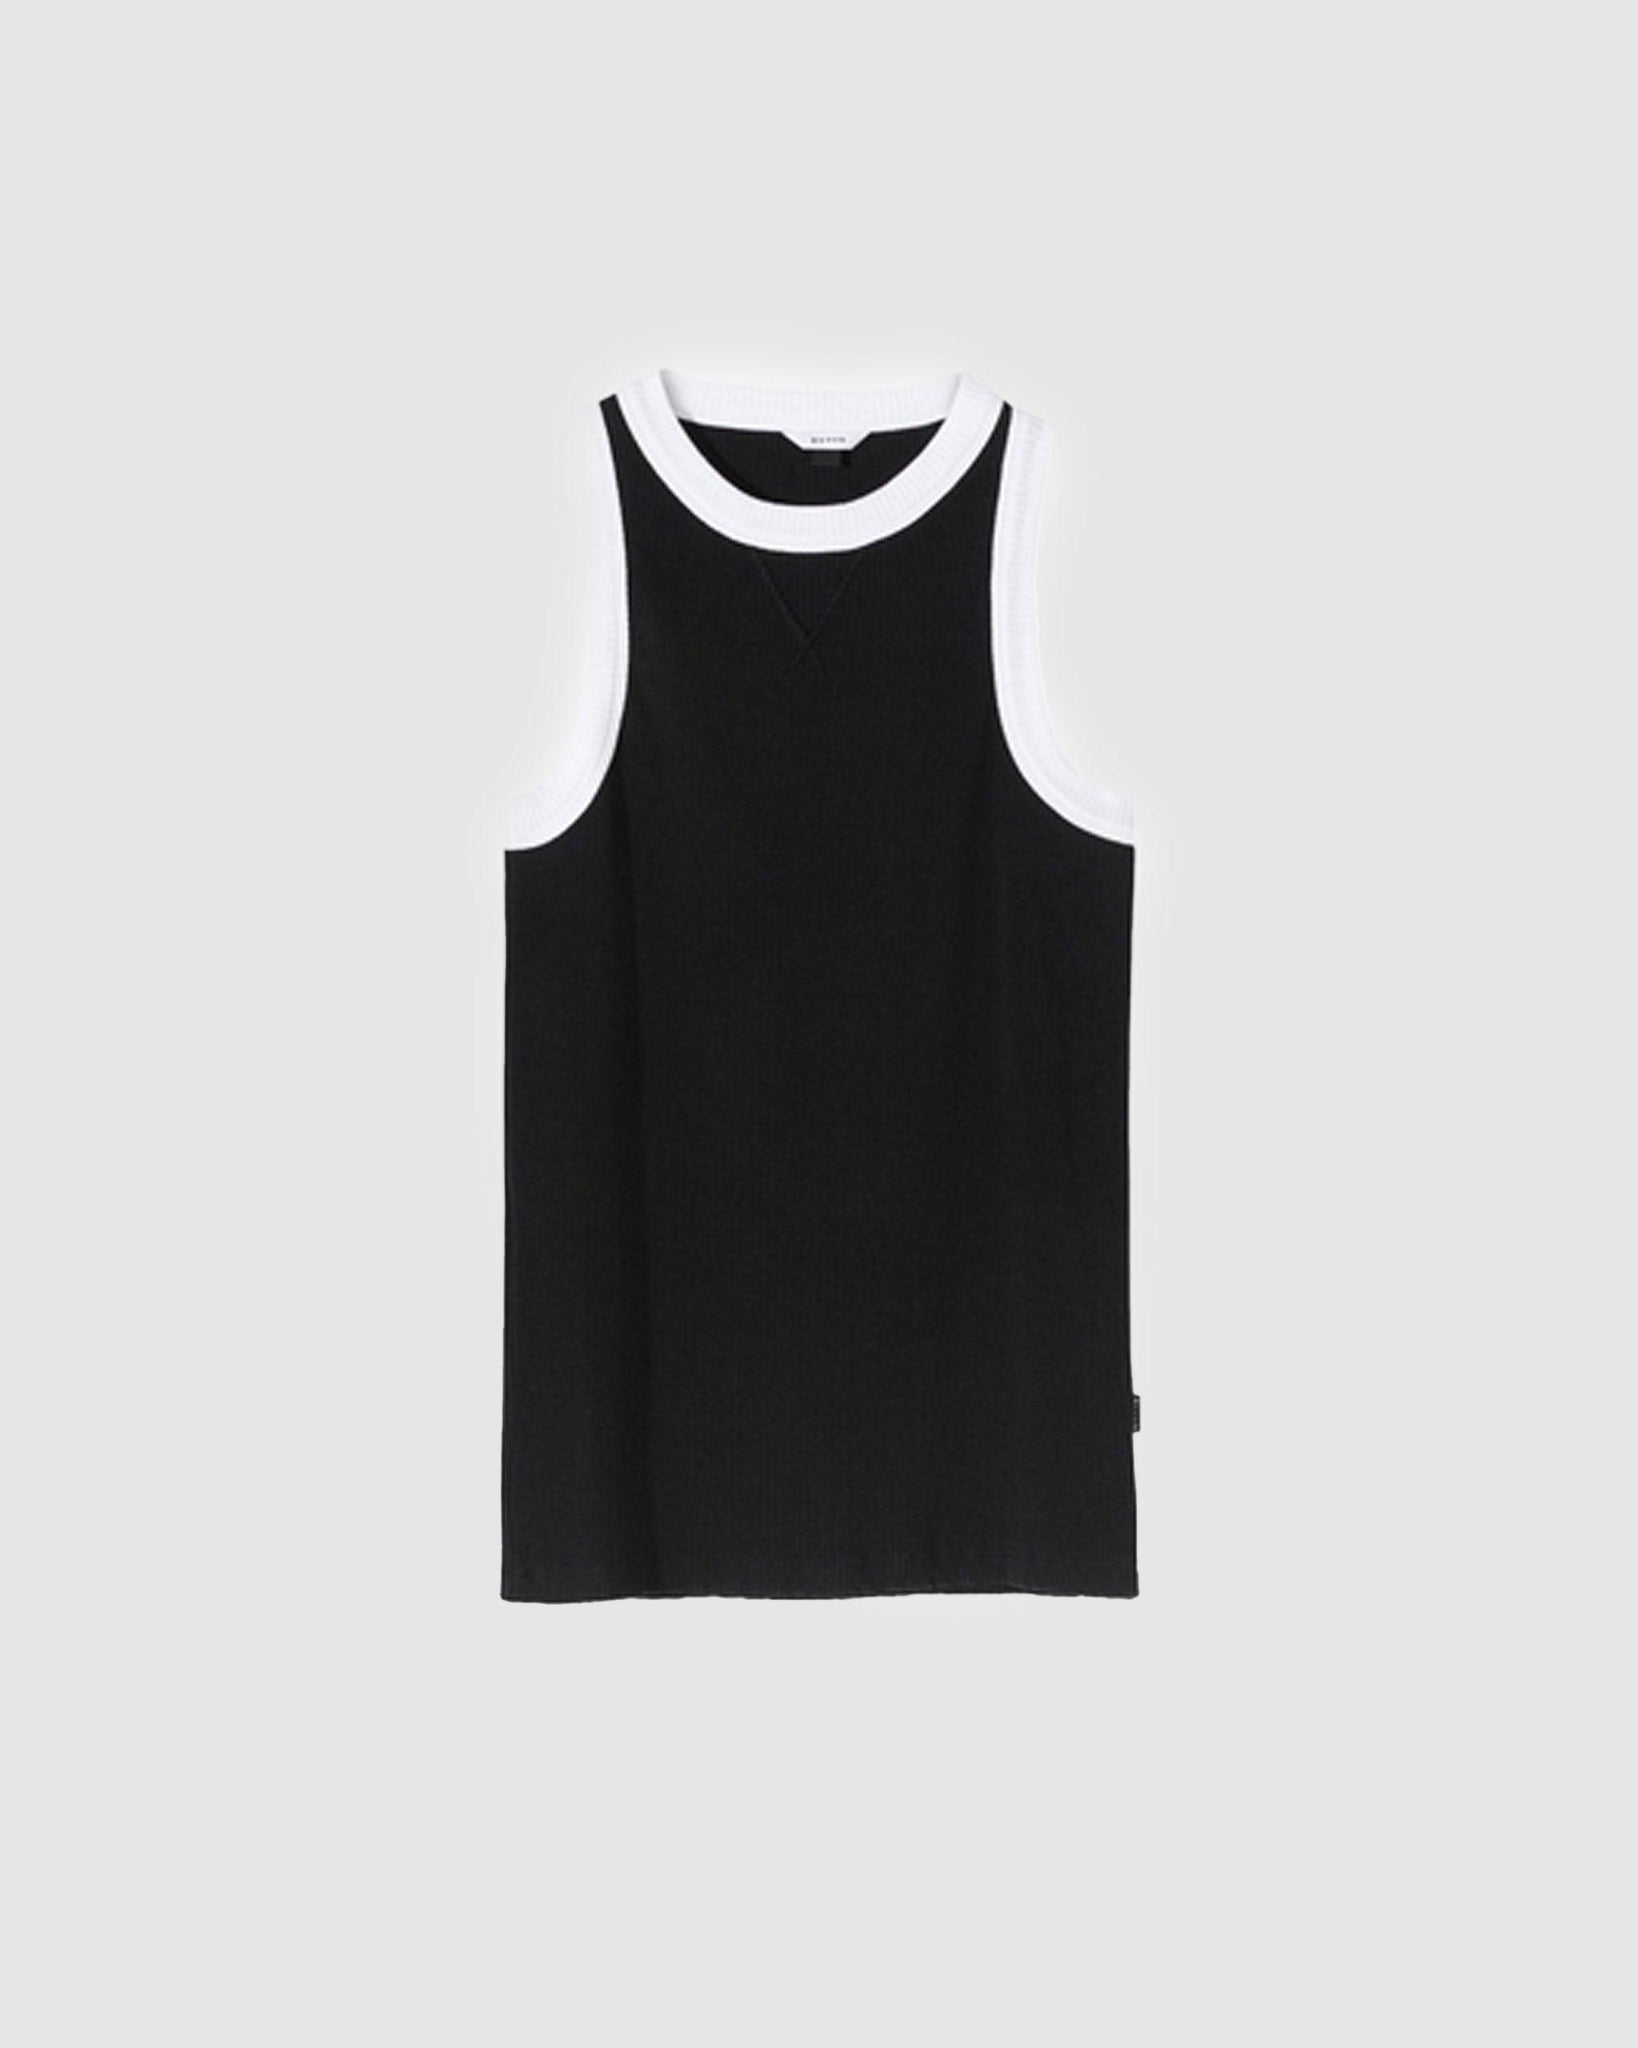 Ivy Crow Tank - {{ collection.title }} - Chinatown Country Club 